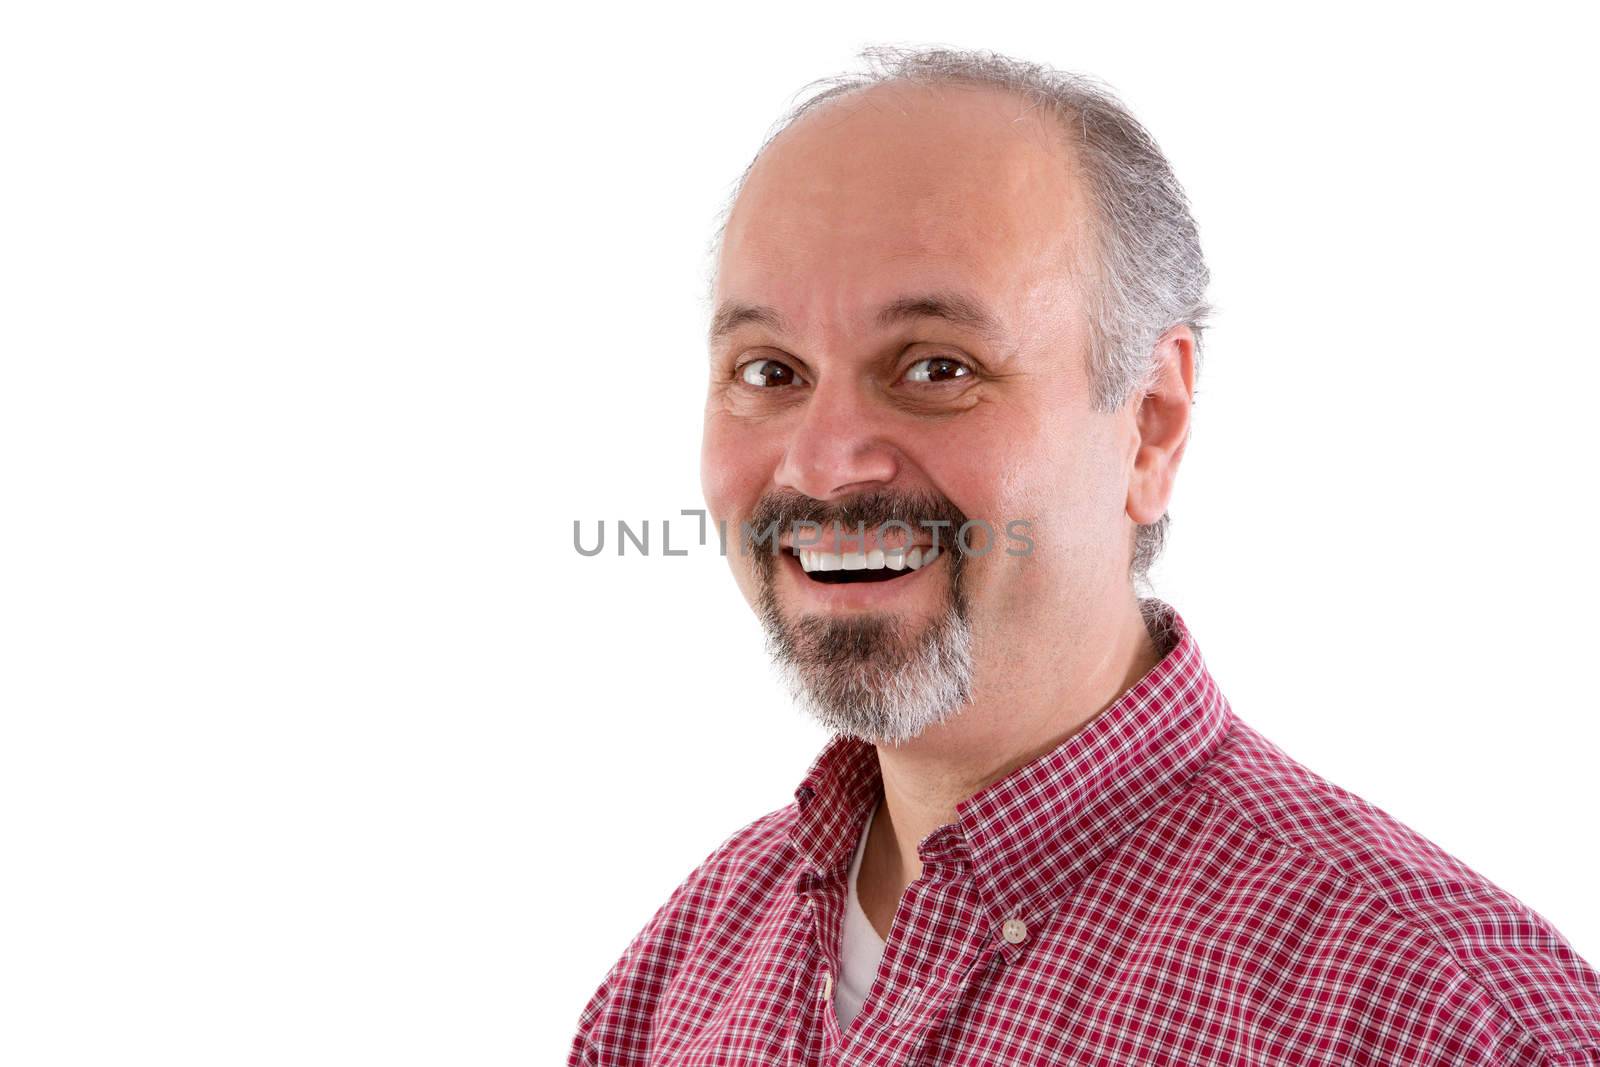 Attractive middle-aged man with a goatee wearing a red checkered shirt and a lovely friendly smile looking sideways at the camera, head and shoulders isolated on white